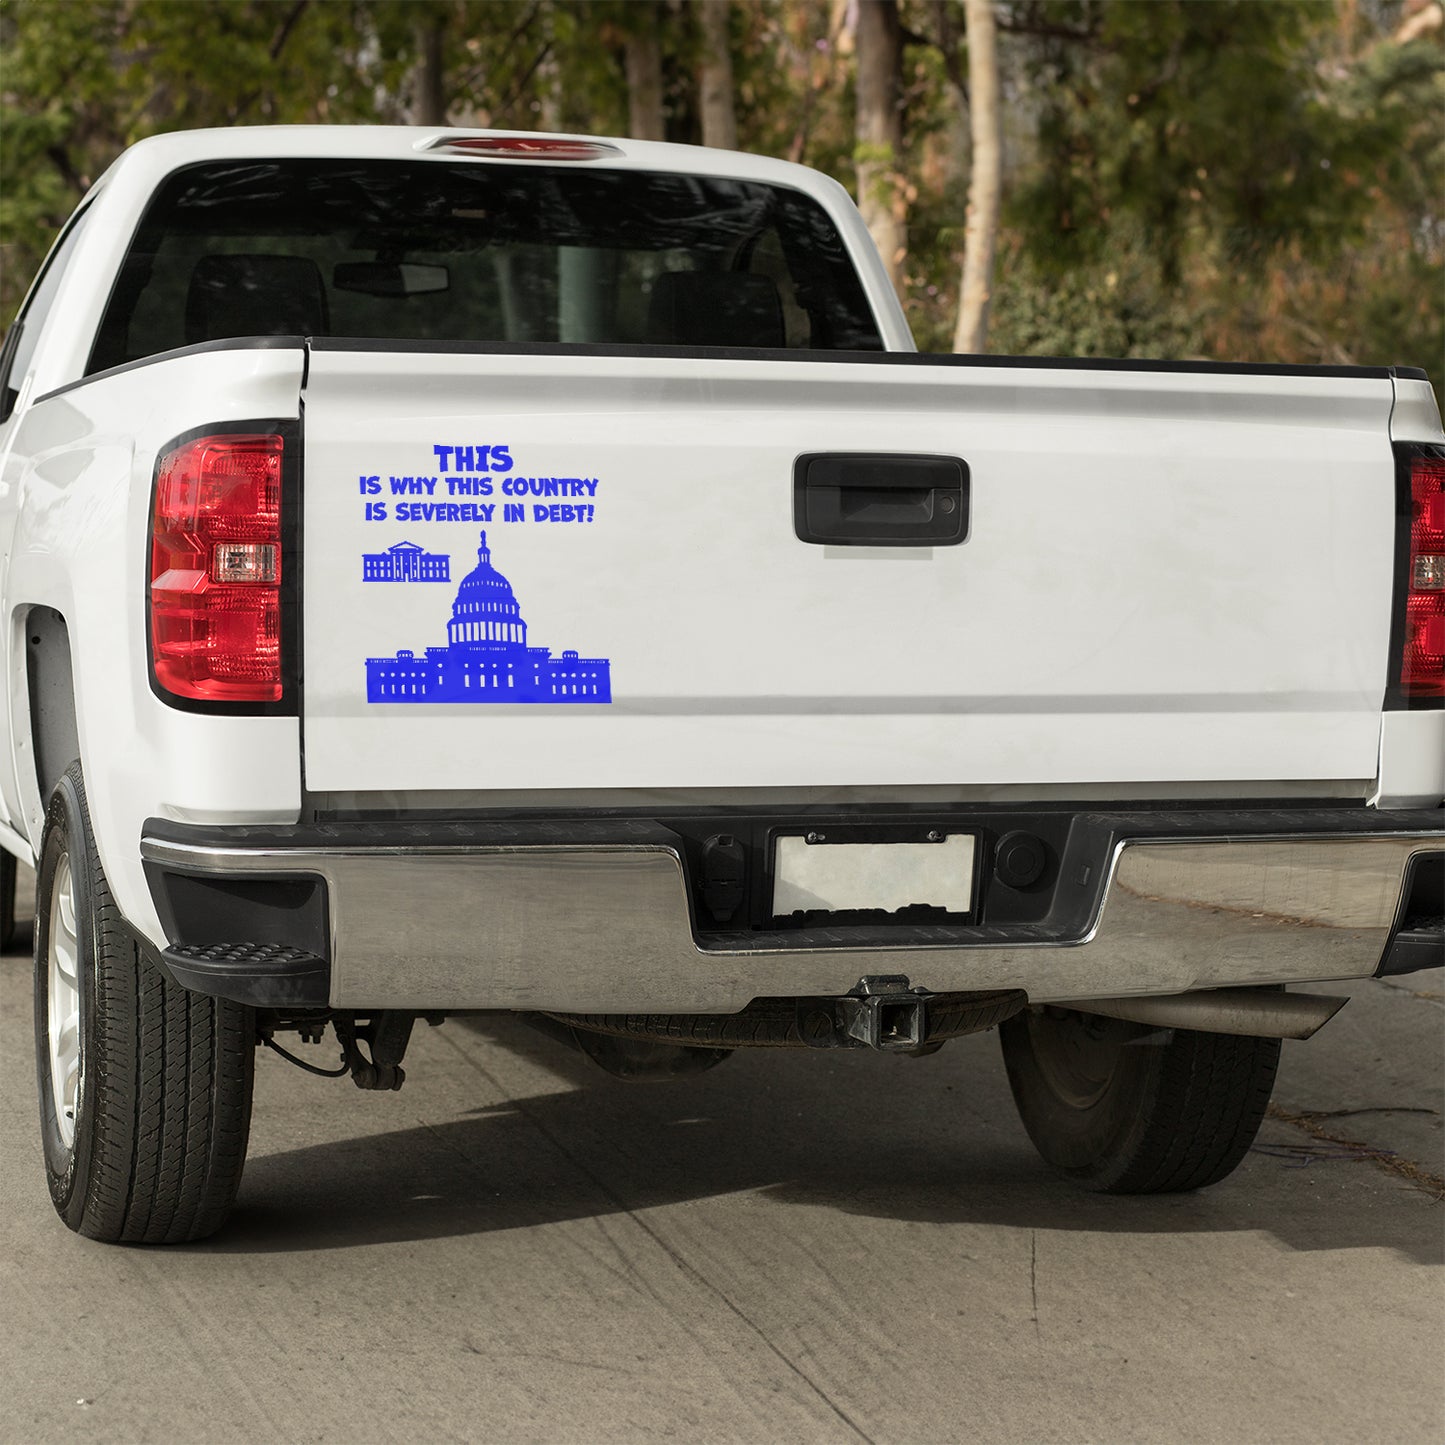 This is why this country is severely in debt Vinyl decal decal stickers Decals for cars Decals for Trucks decals for tumblers minivan sticker SUV decals truck decals window decal car Window decals window decor